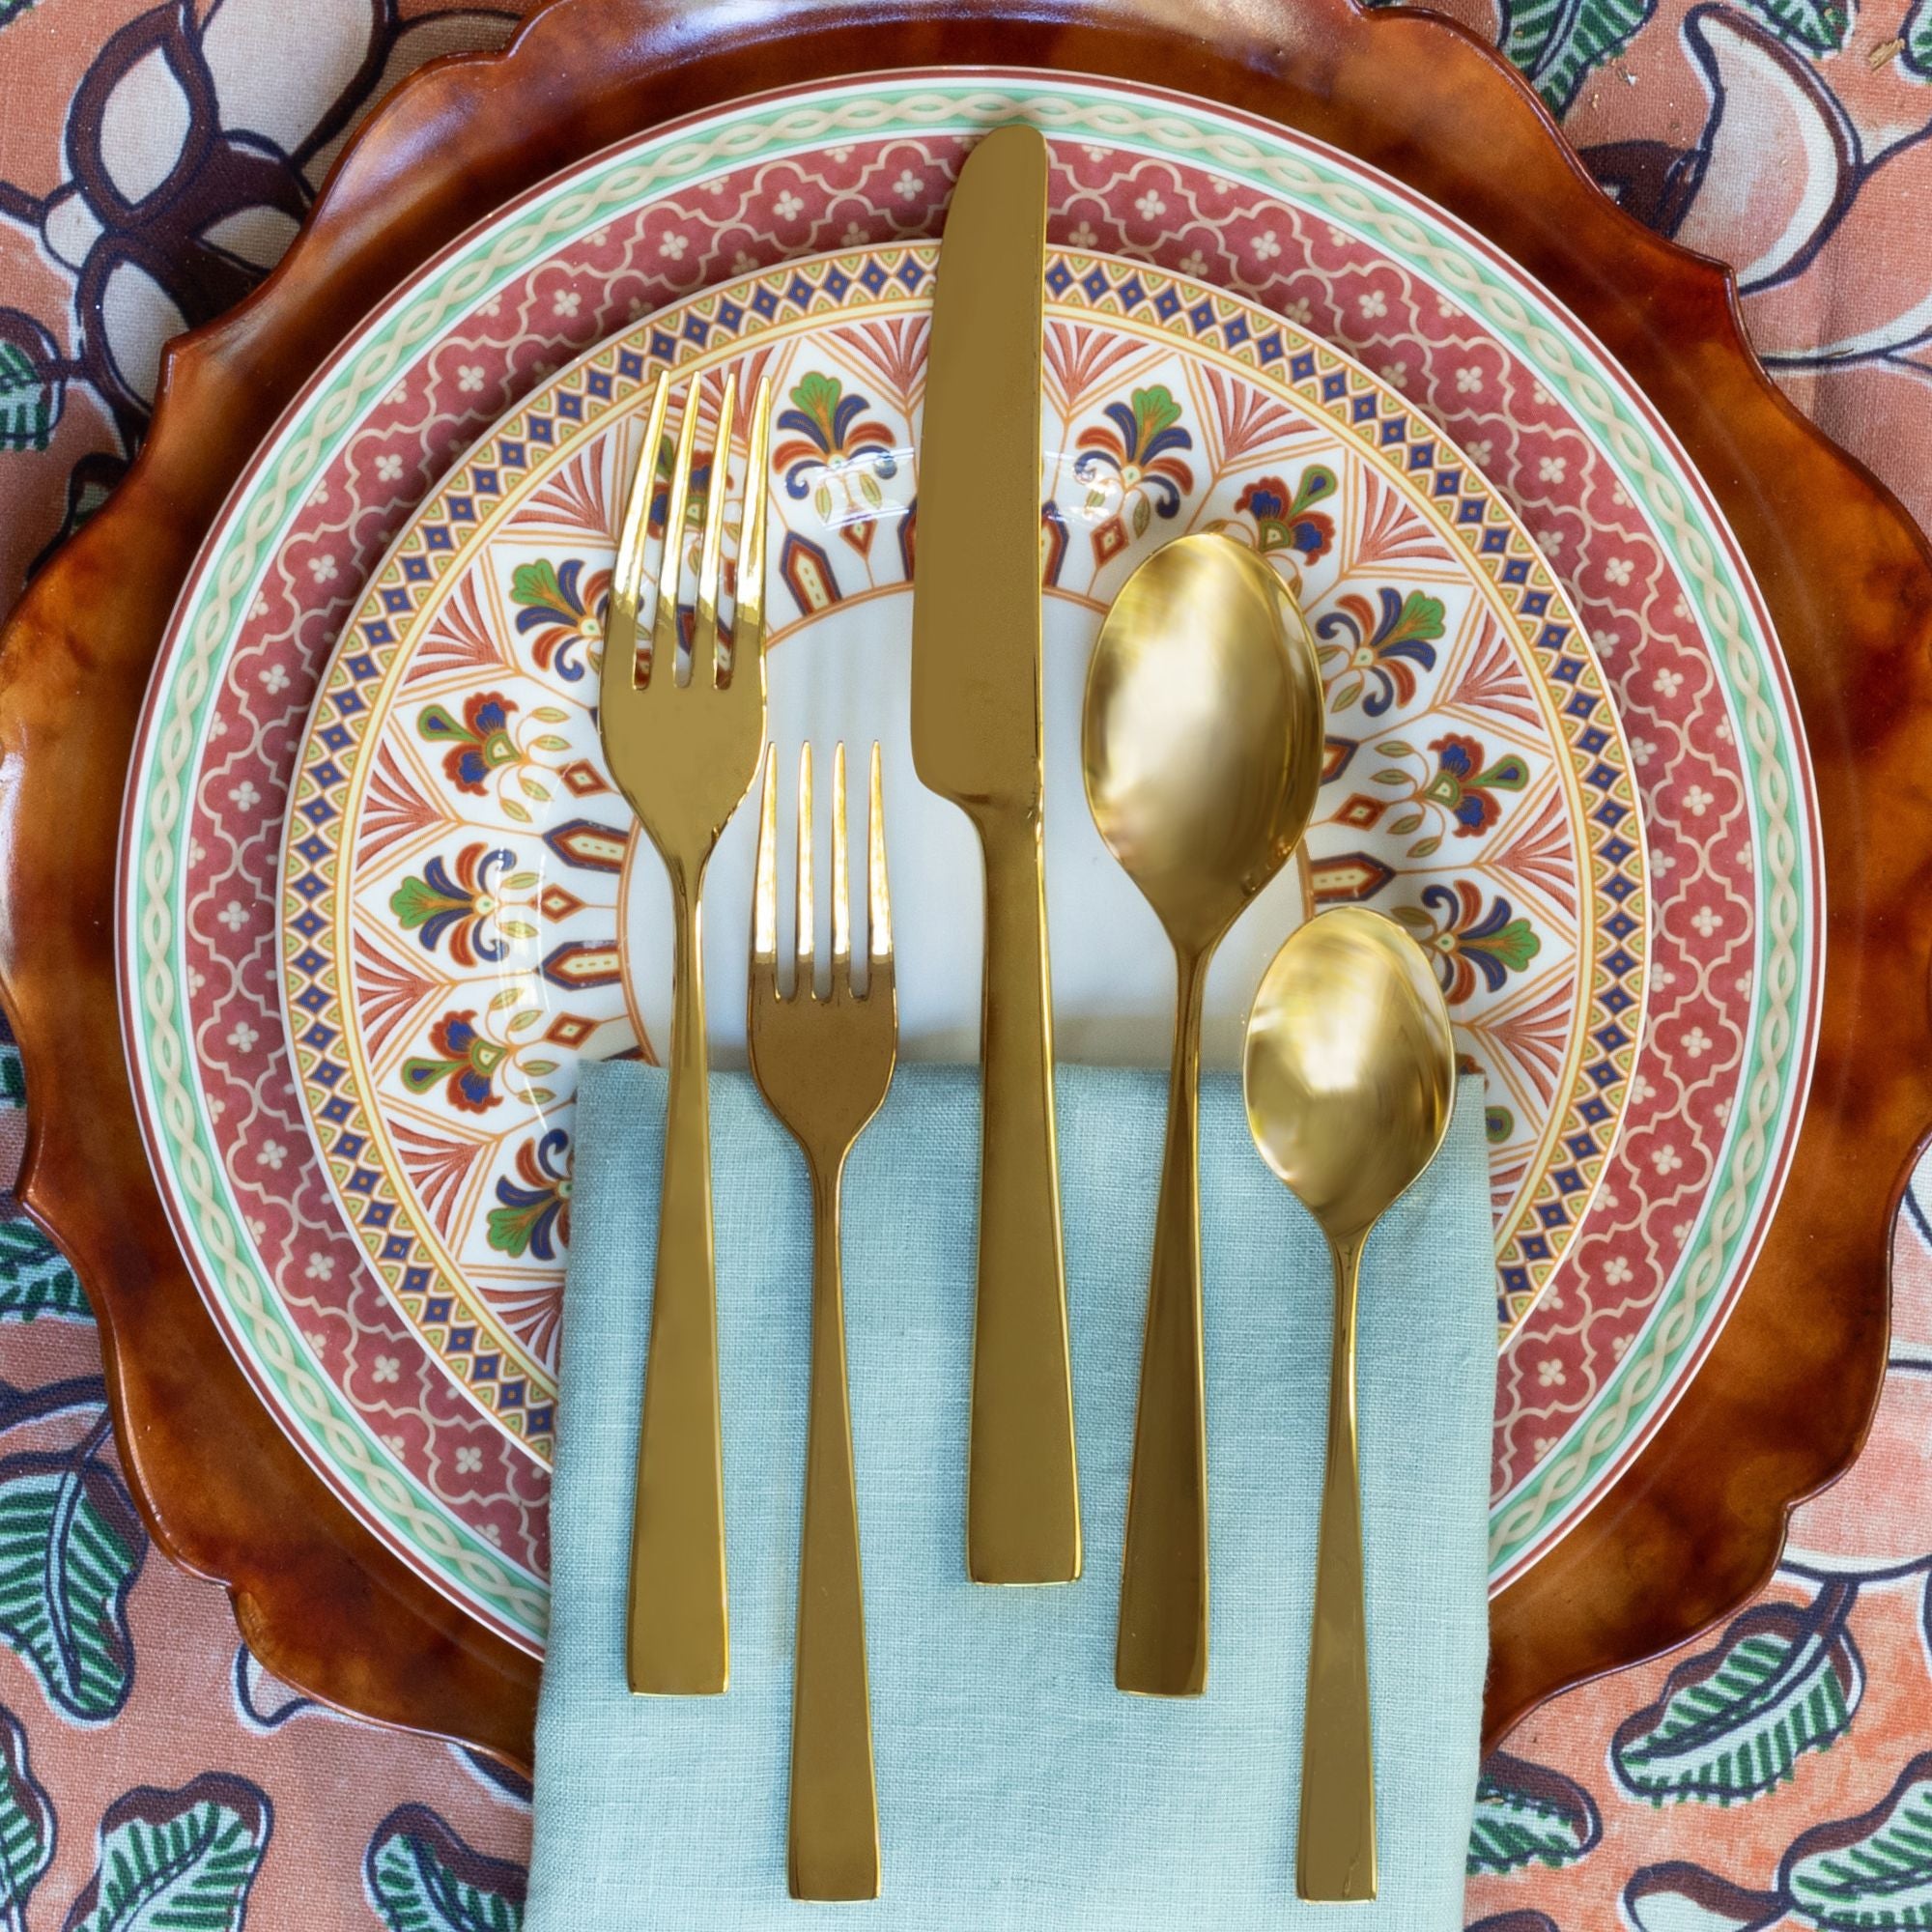 Argento-Gold Luster Five-Piece Place Setting – Set of 4